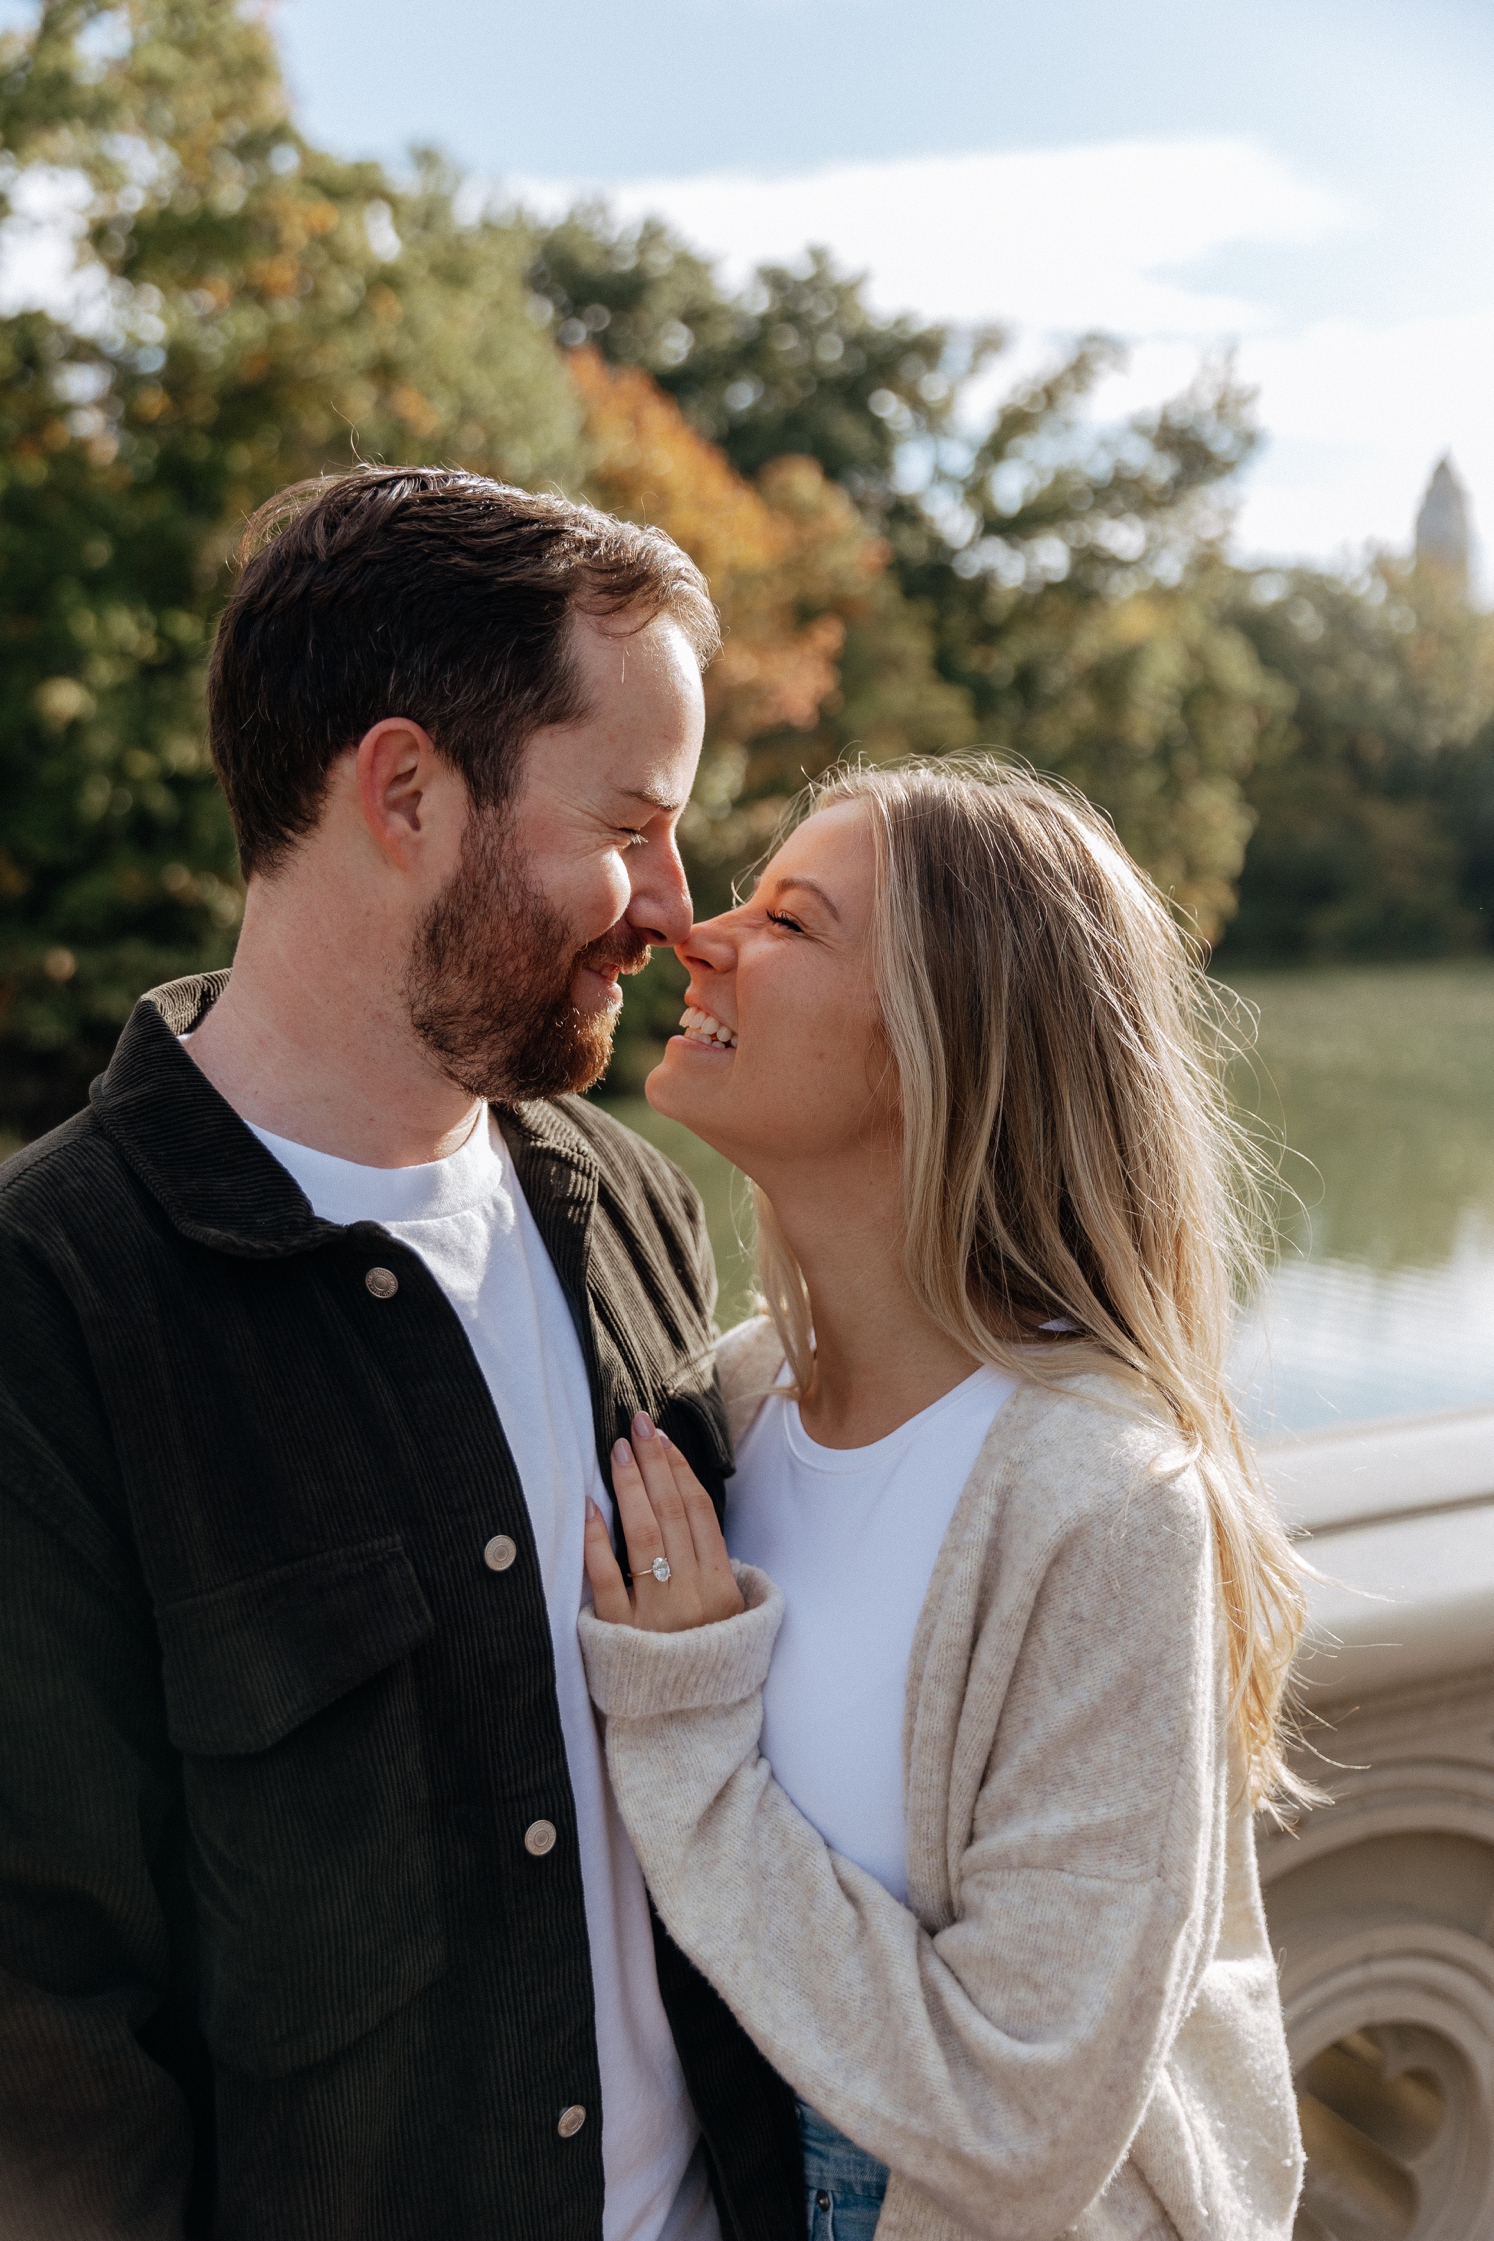 Newly engaged couple looking at each other while standing on bridge during engagement shoot | McArthur Weddings and Events